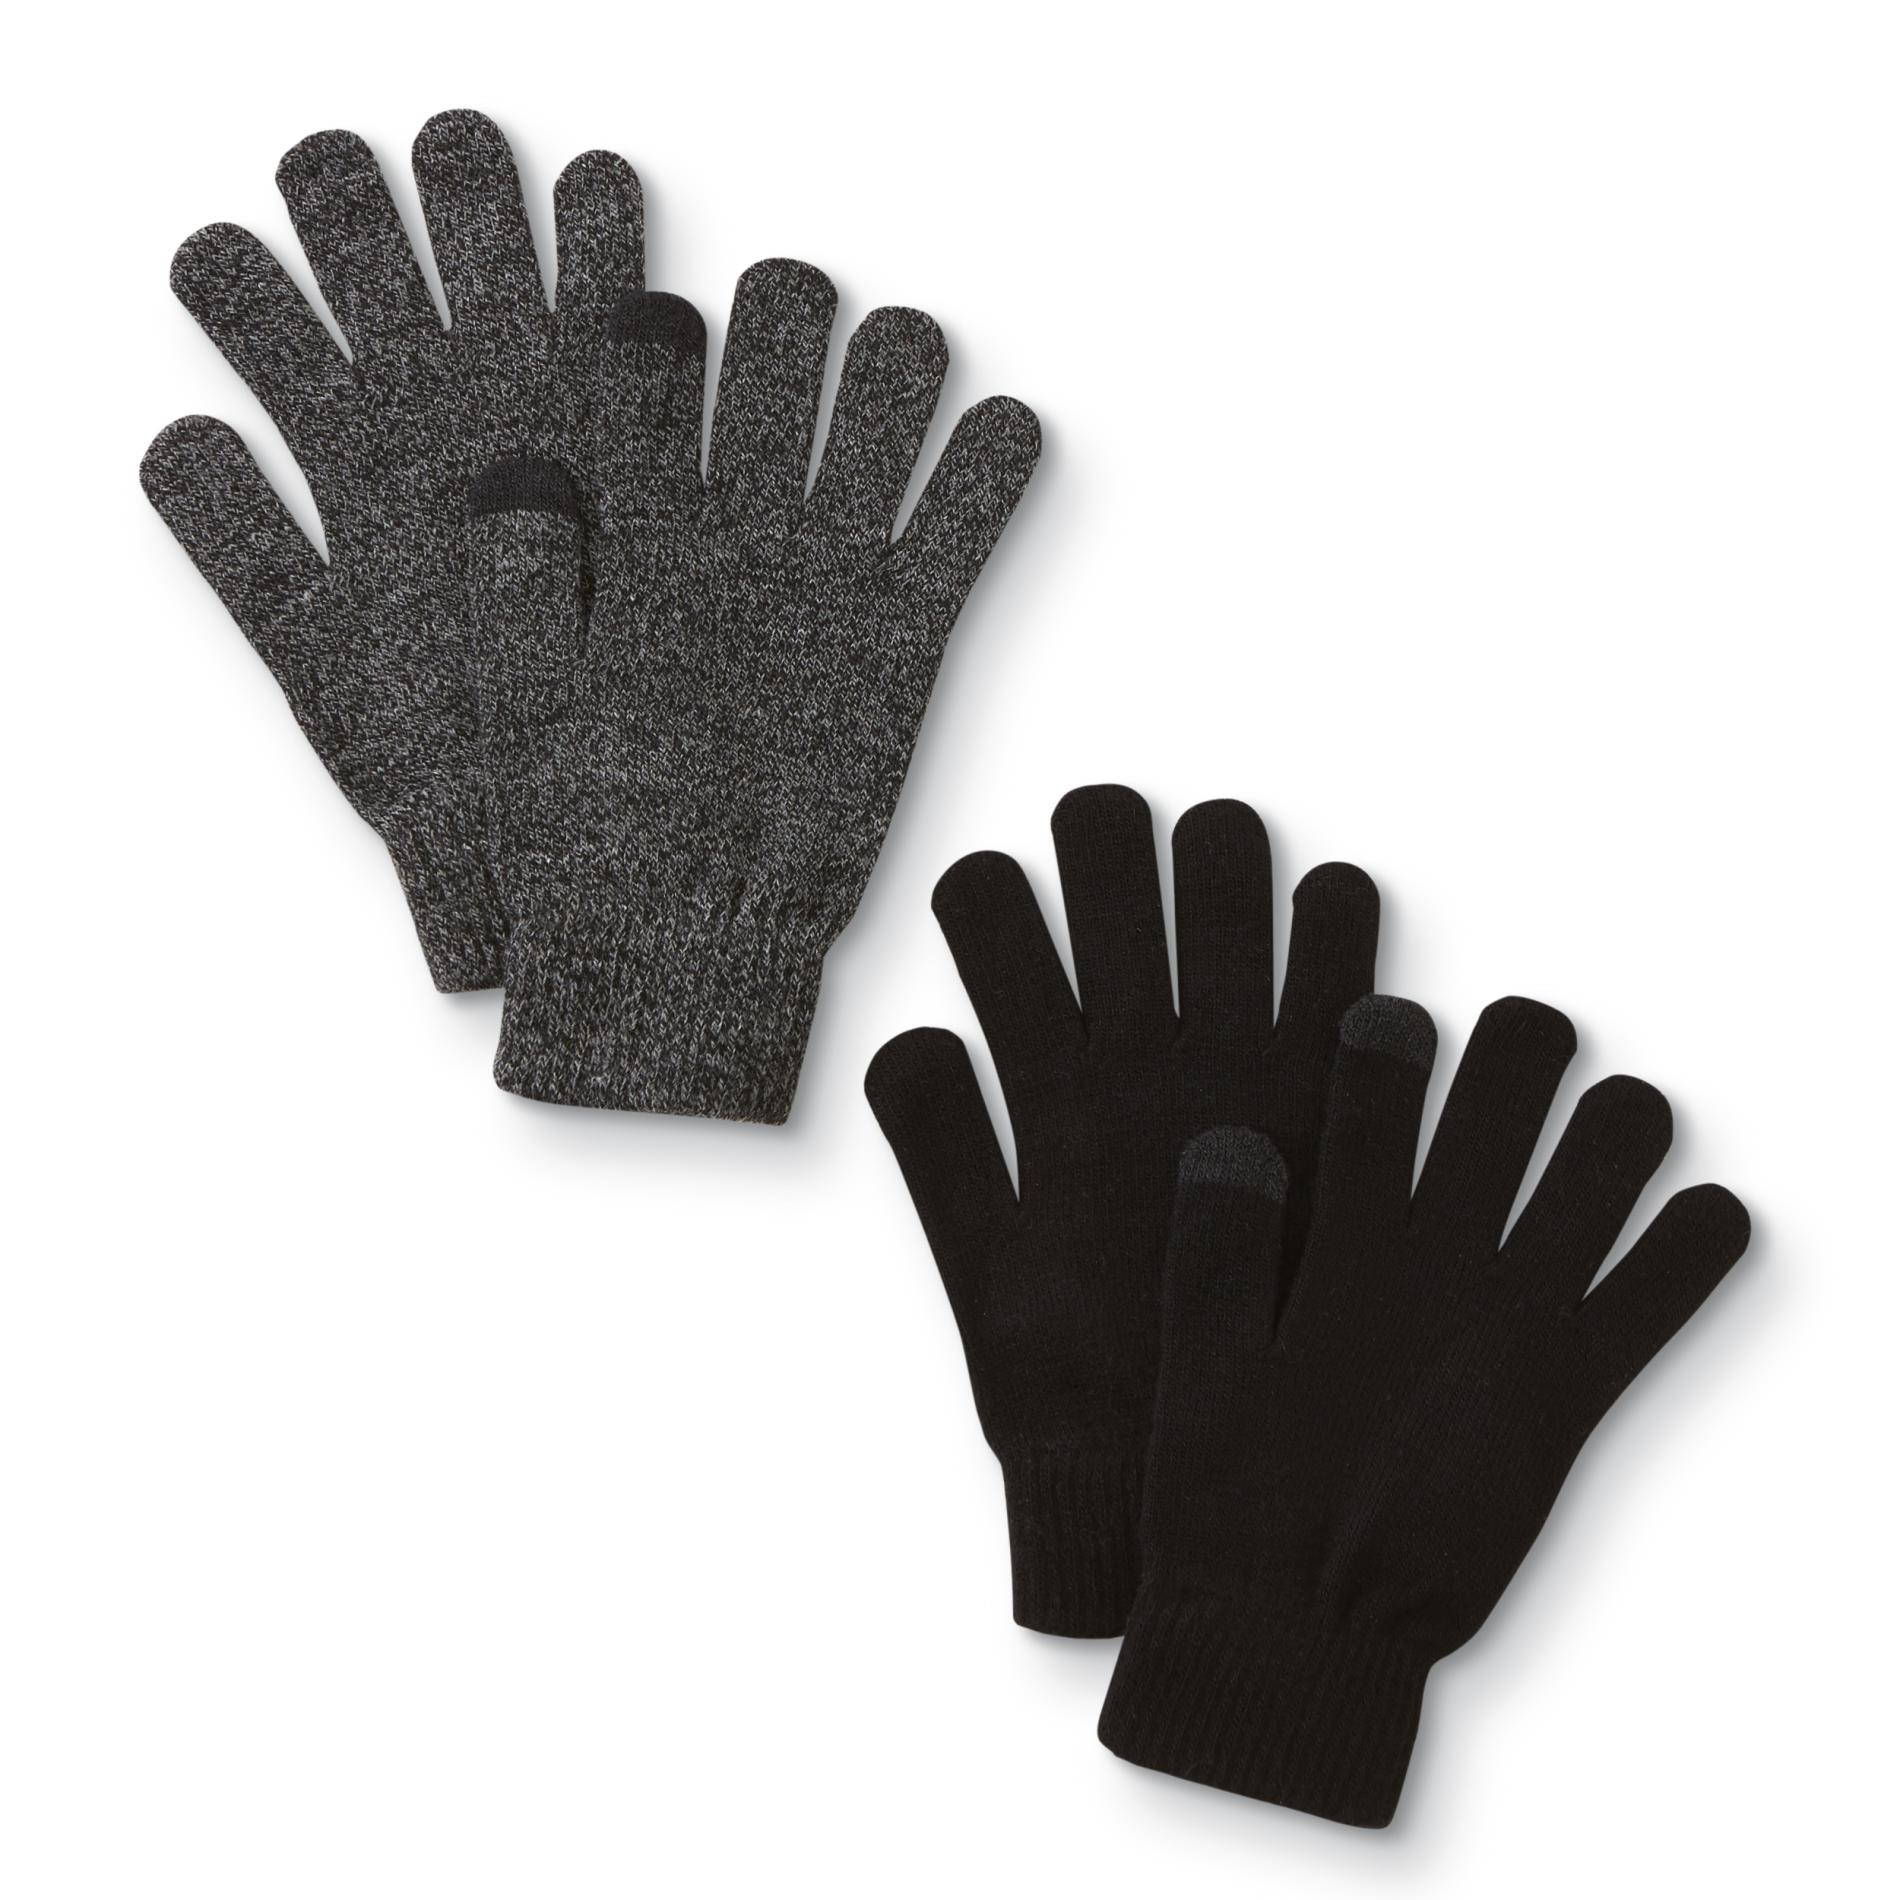 Simply Styled Men's 2-Pairs Gloves